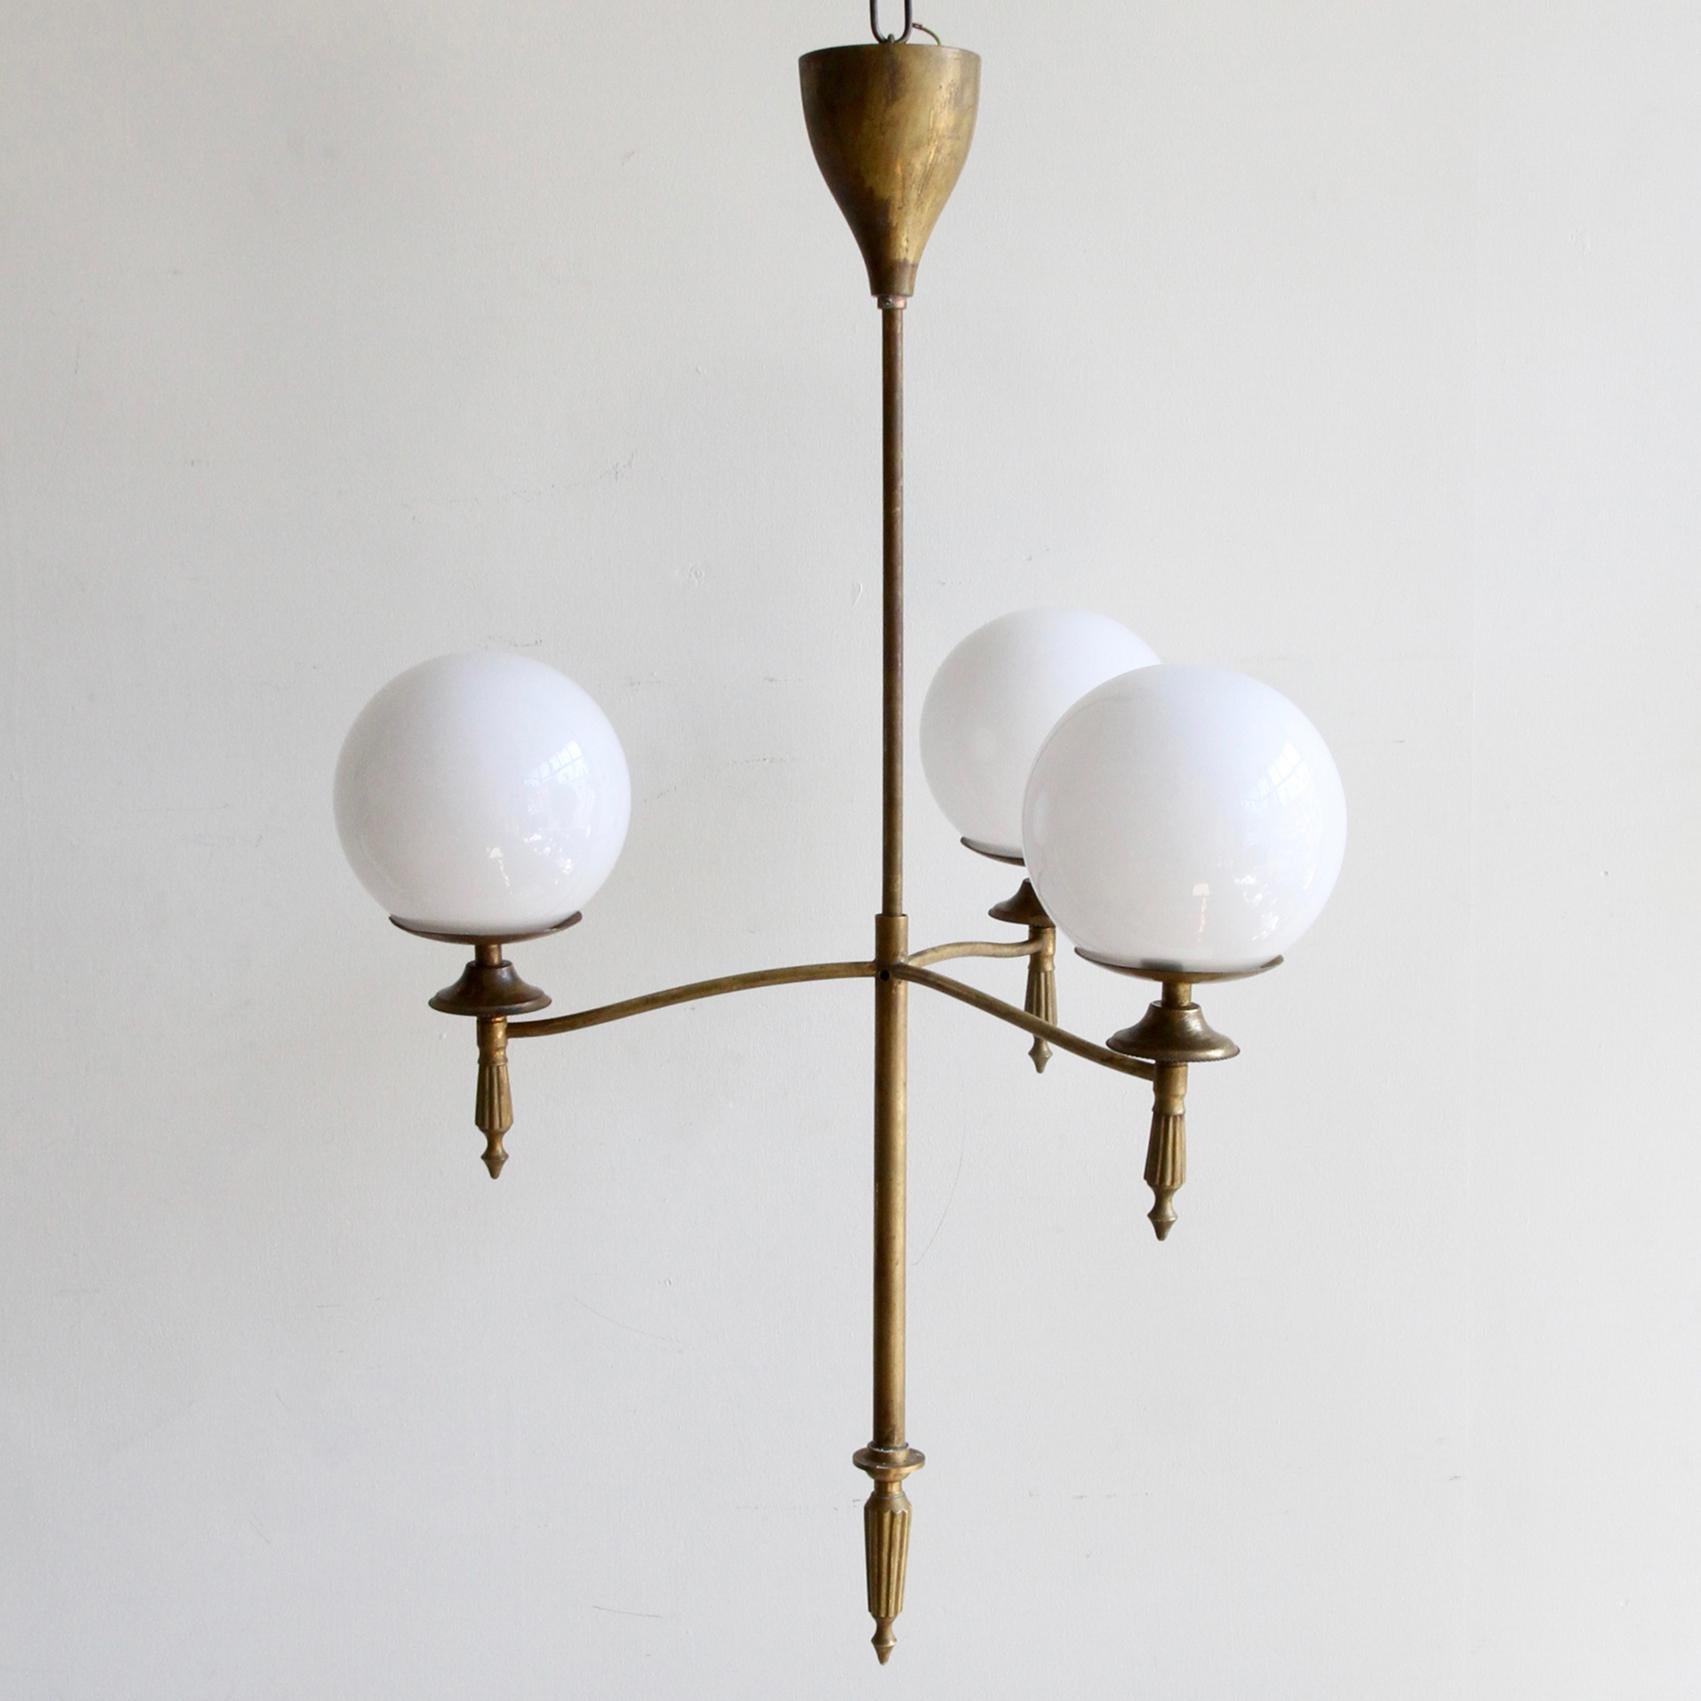 Early 20th century French chandelier with three polished glass opaline shades. The shades sit beautifully on monk cap galleries supported by the delicate tubular frame. The brass has aged naturally to create the patina. The chandelier comes supplied